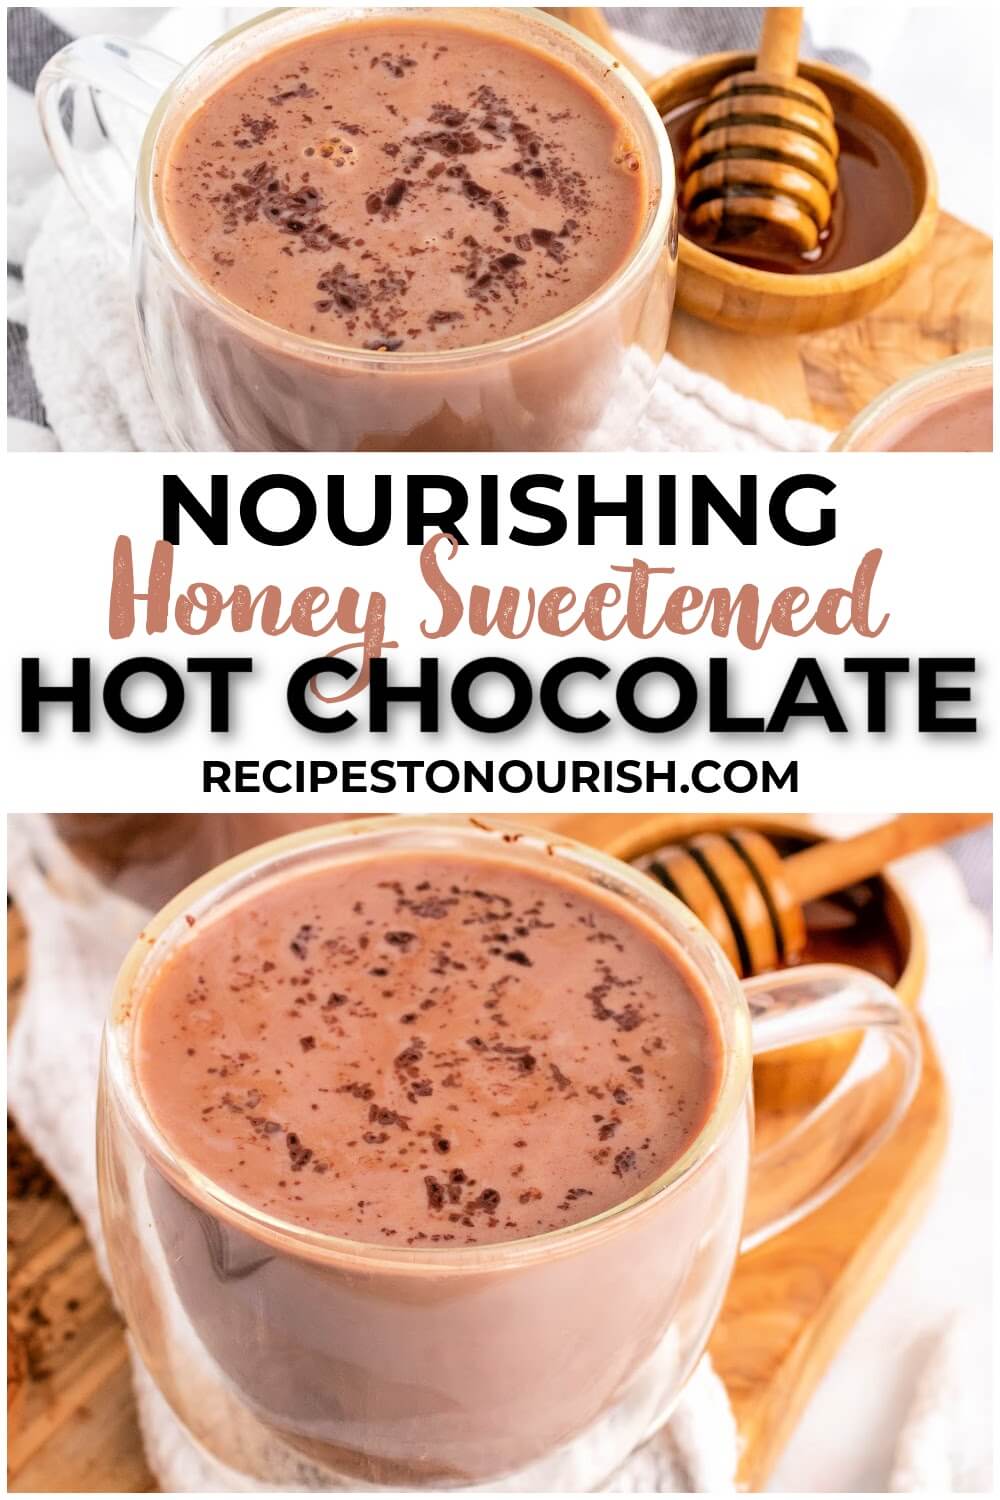 Two glass mugs filled with hot chocolate topped with chocolate shavings sitting on top of a cloth kitchen towel on top of a wooden cutting board next to a small bowl full of honey with a honey dipper next to the hot chocolates with text that says nourishing honey sweetened hot chocolate recipestonourish.com.